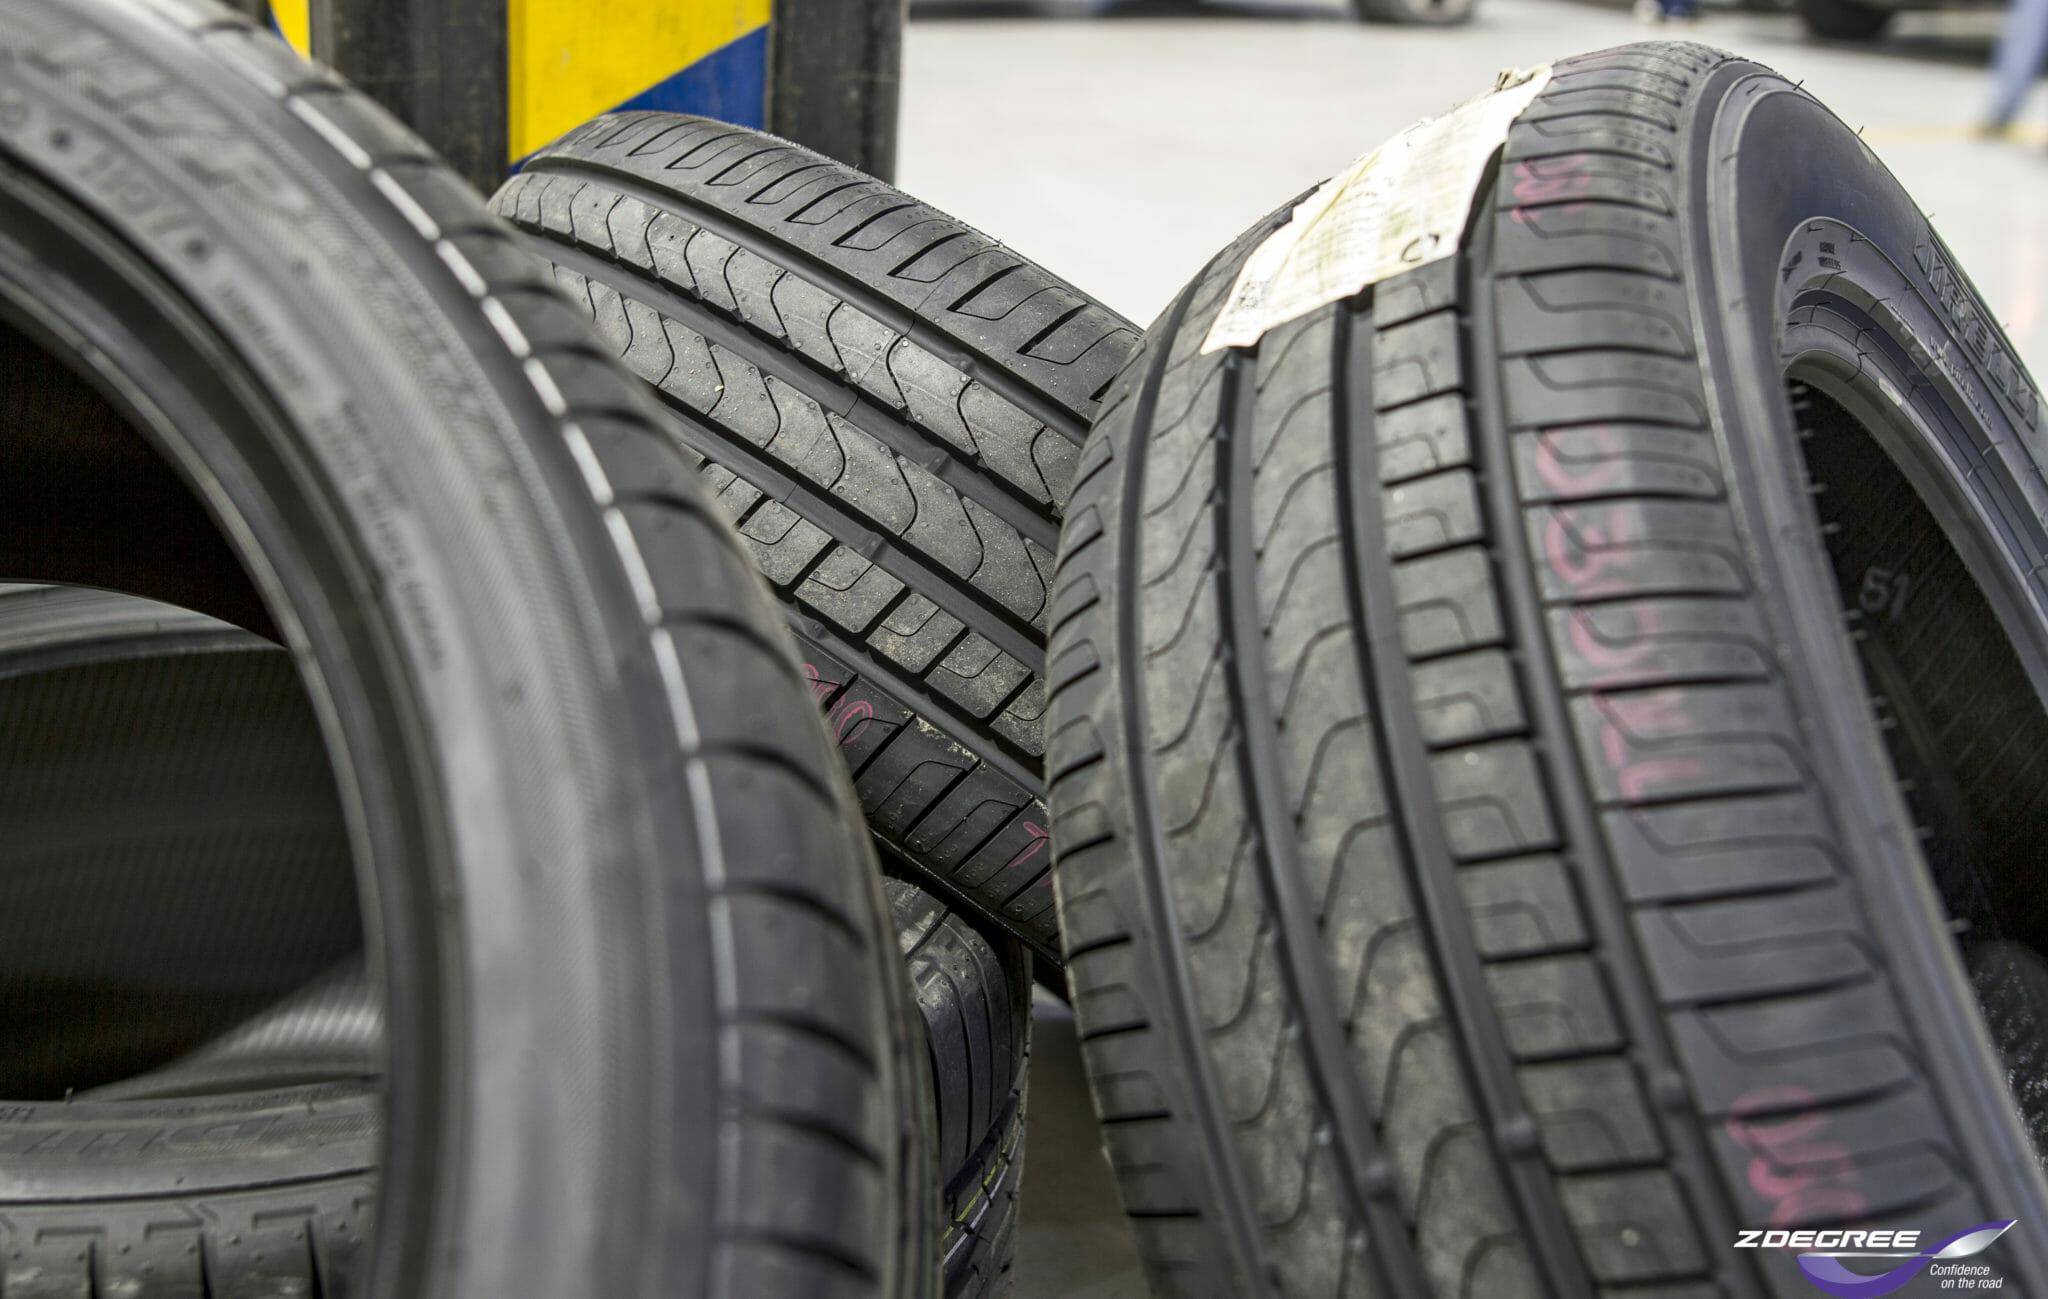 Beware of Fake Tires & buy the top brand tires from Zdegree!